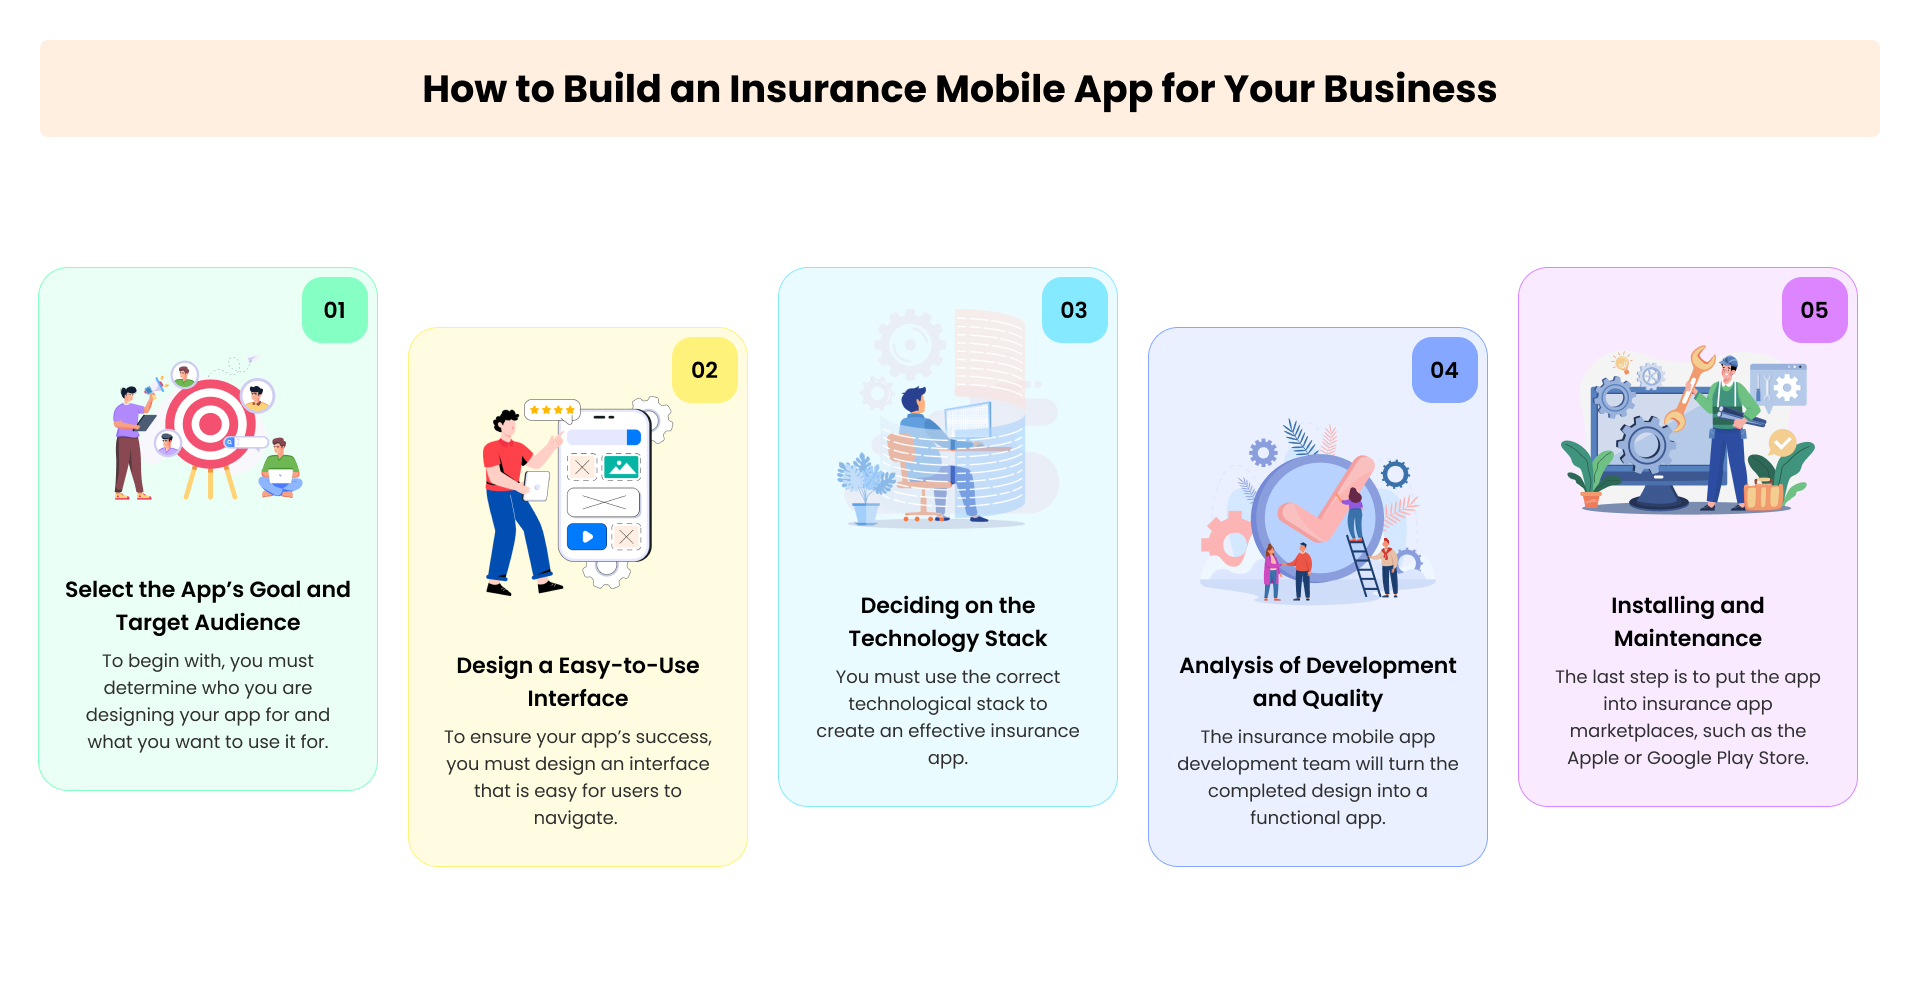 How to Build an Insurance Mobile App for Your Business